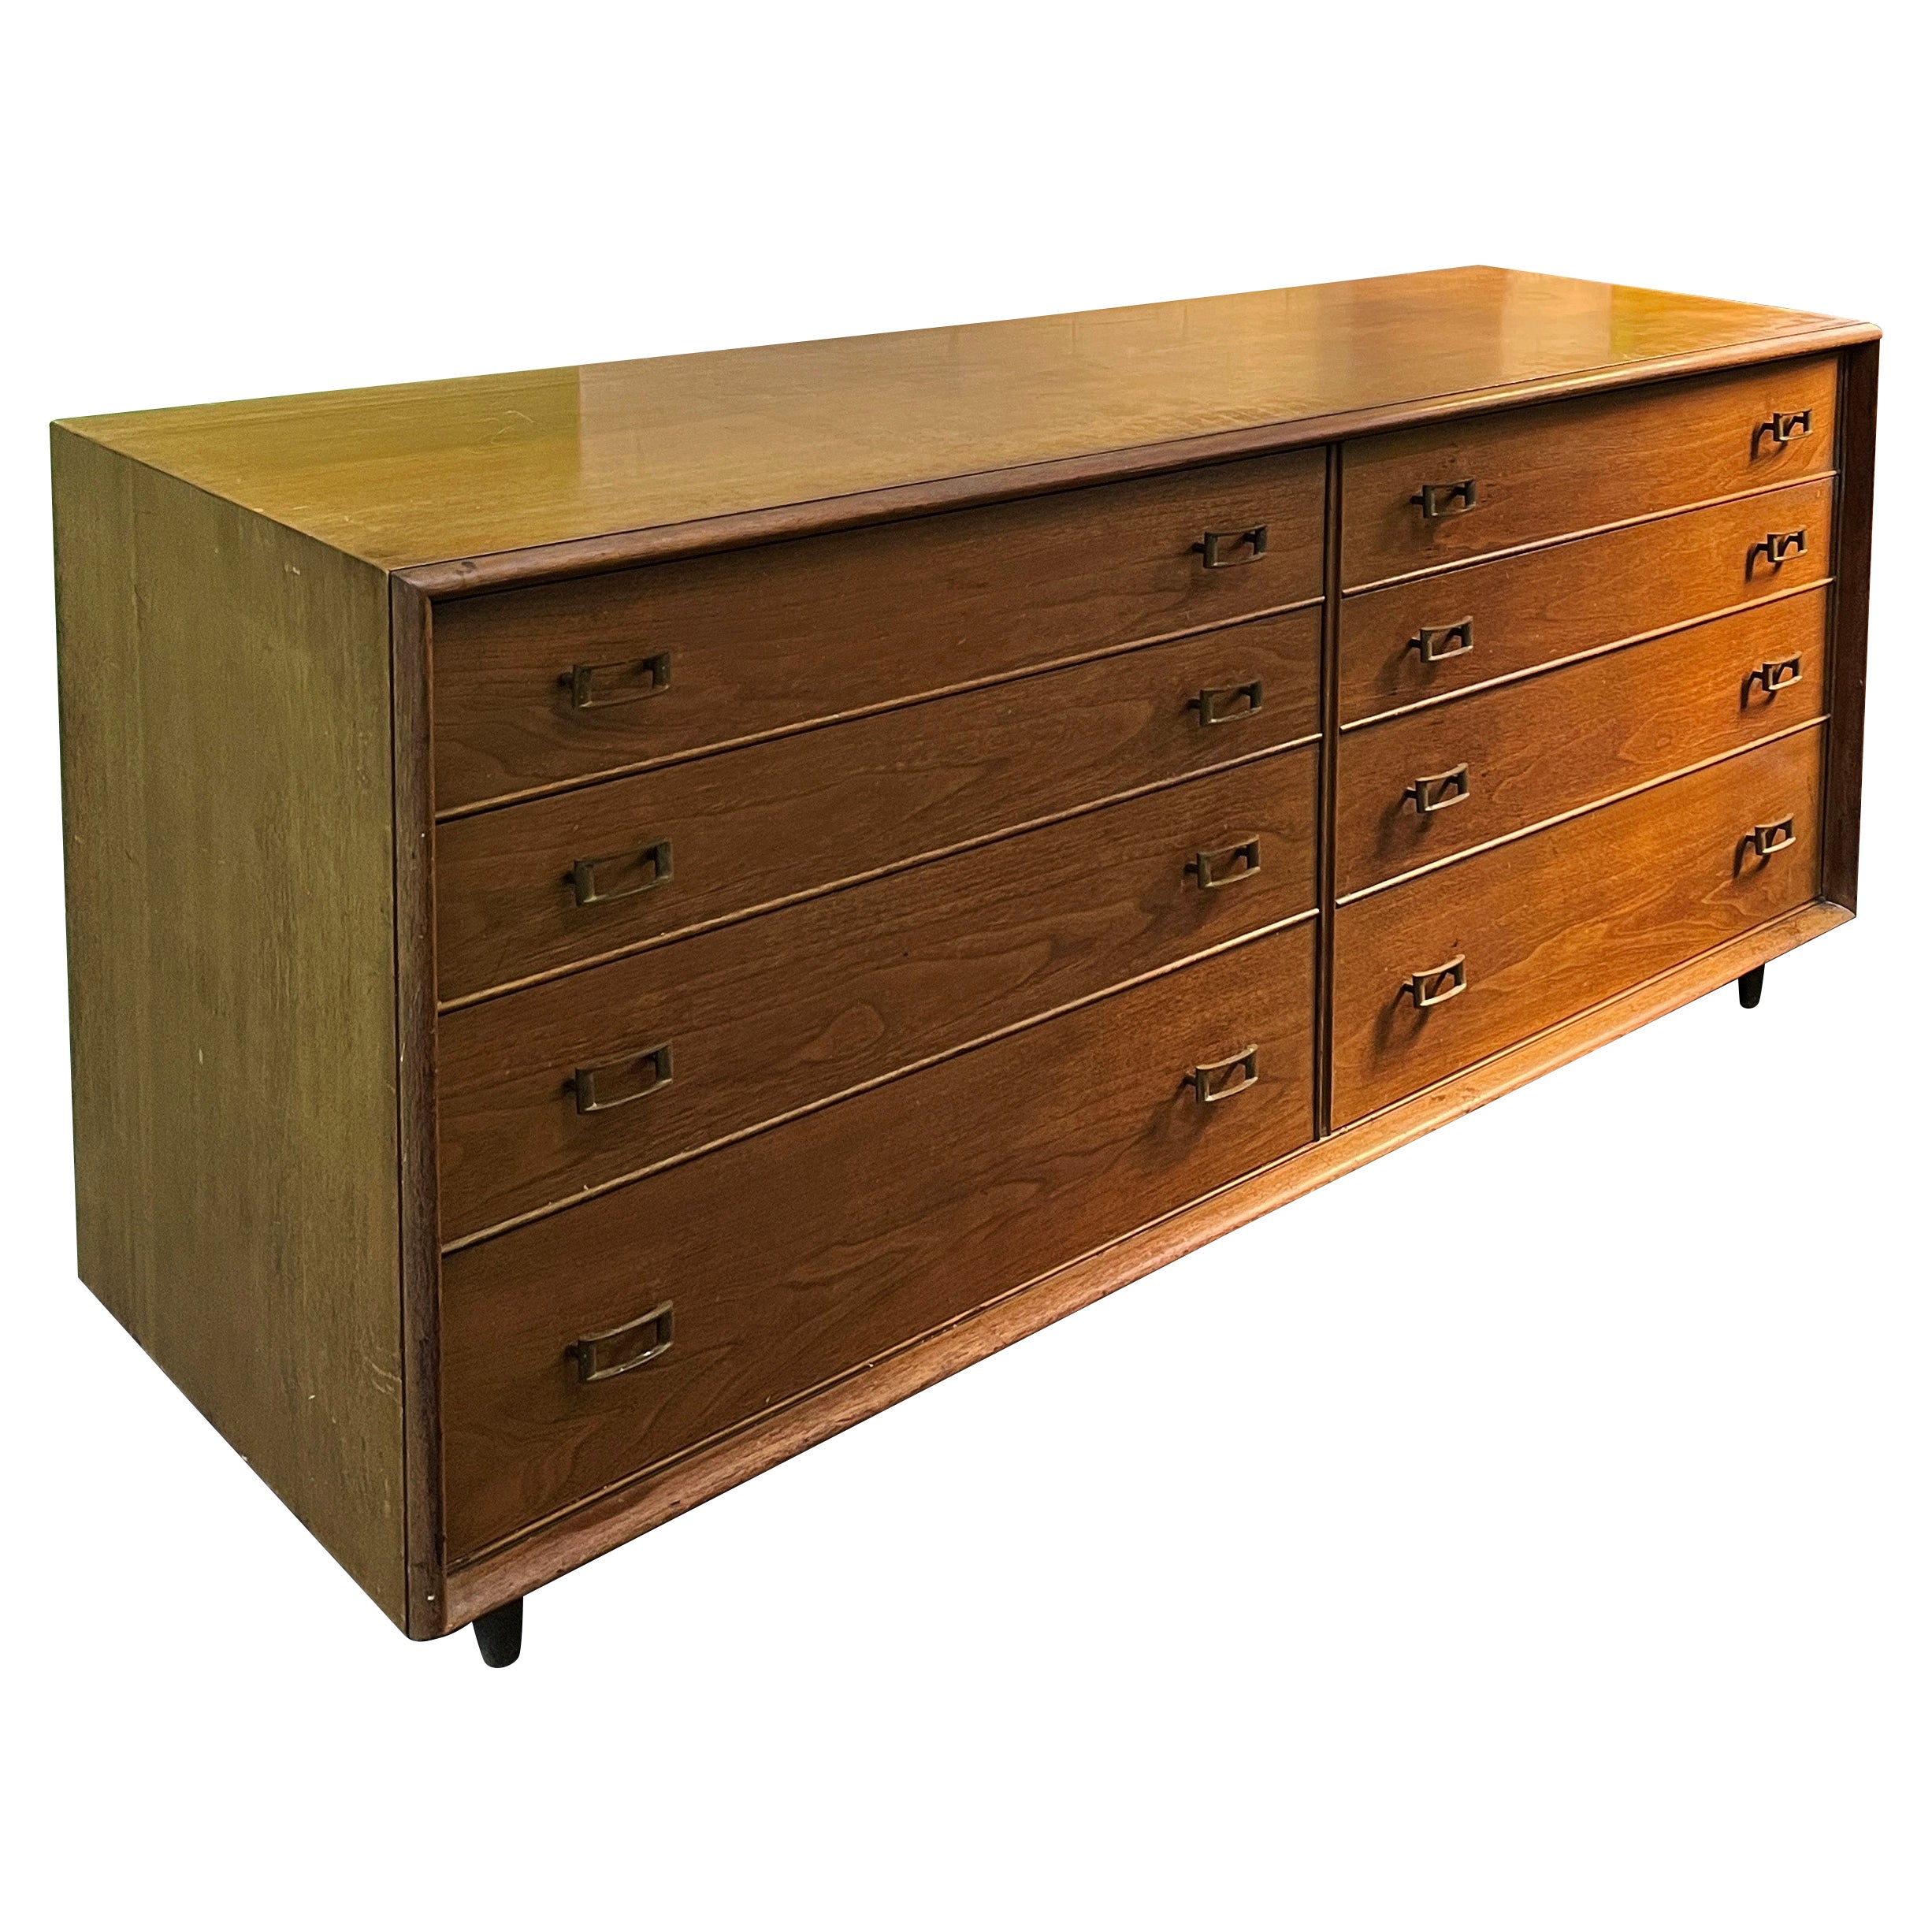 Paul Frankl Walnut Dresser with Brass Buckle Pulls and Feet 1950s 'Signed'